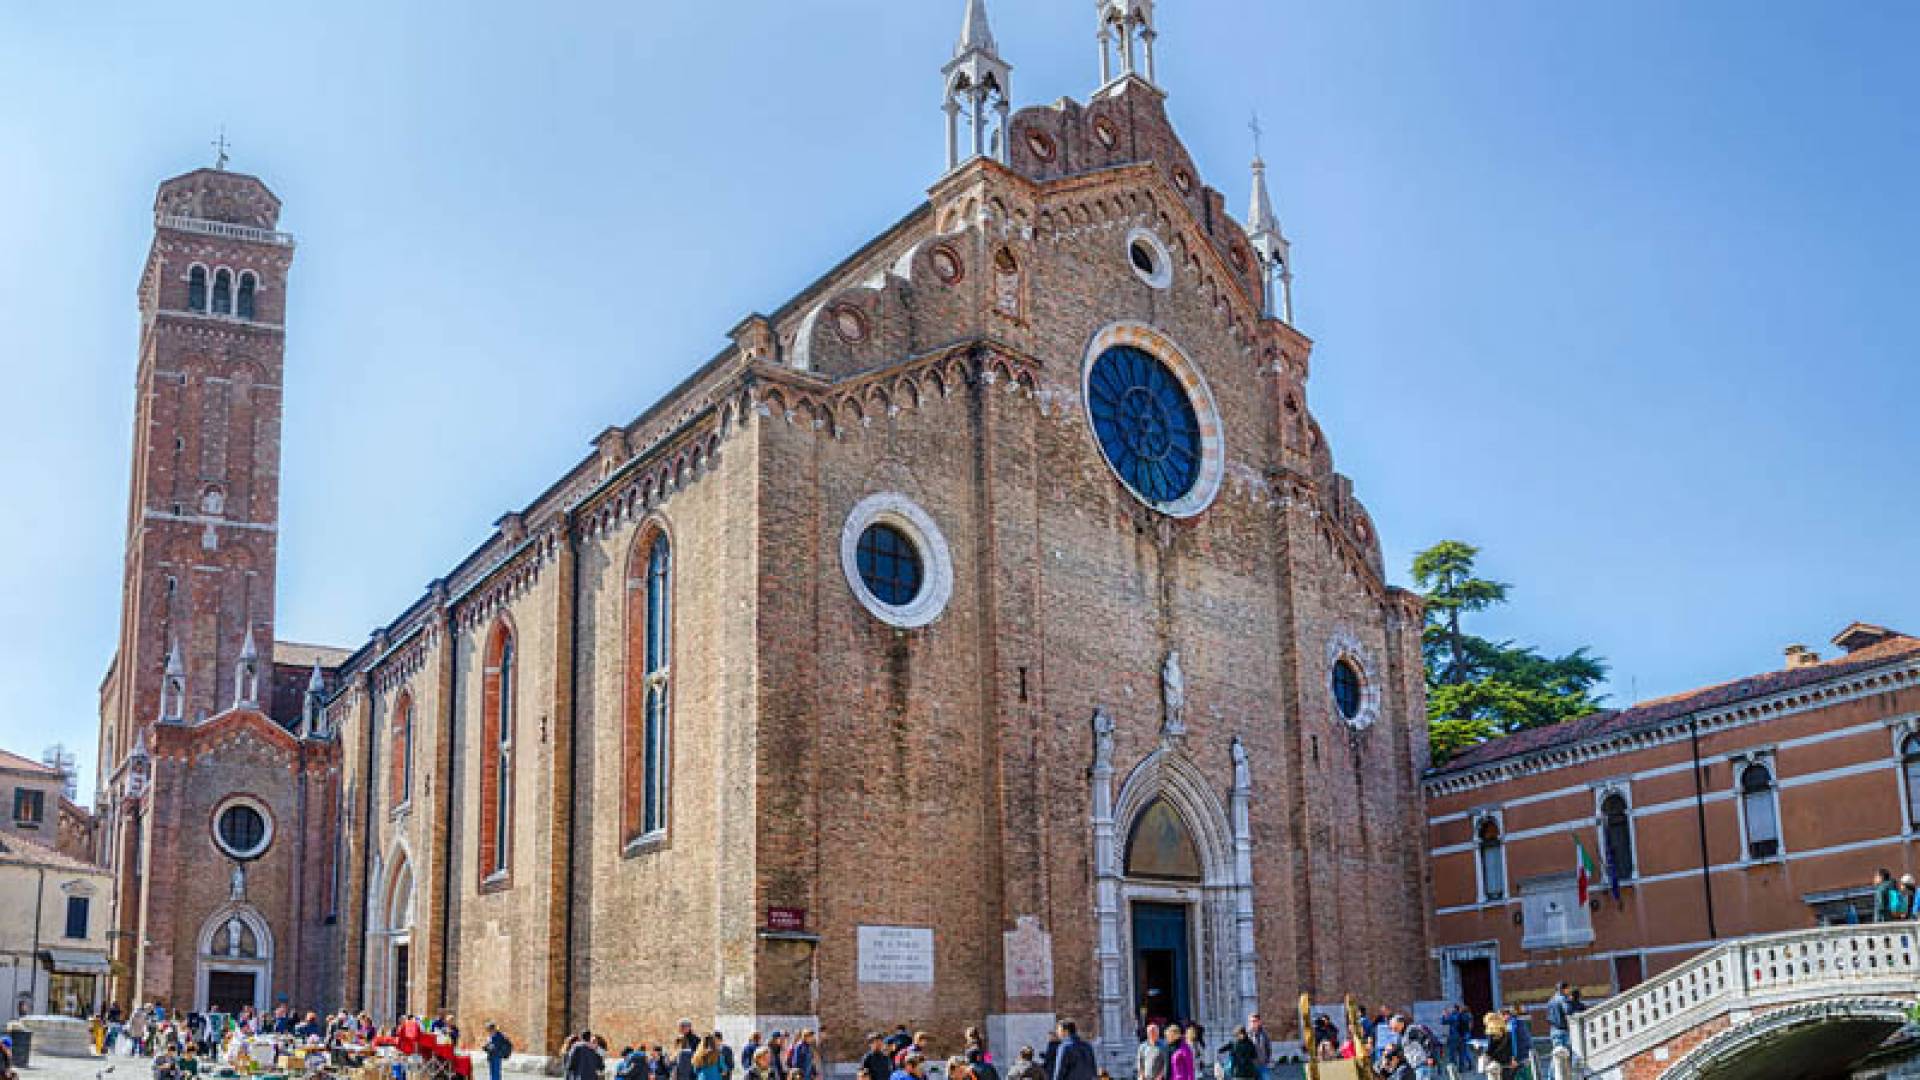 BASILICA OF THE FRIARS, History